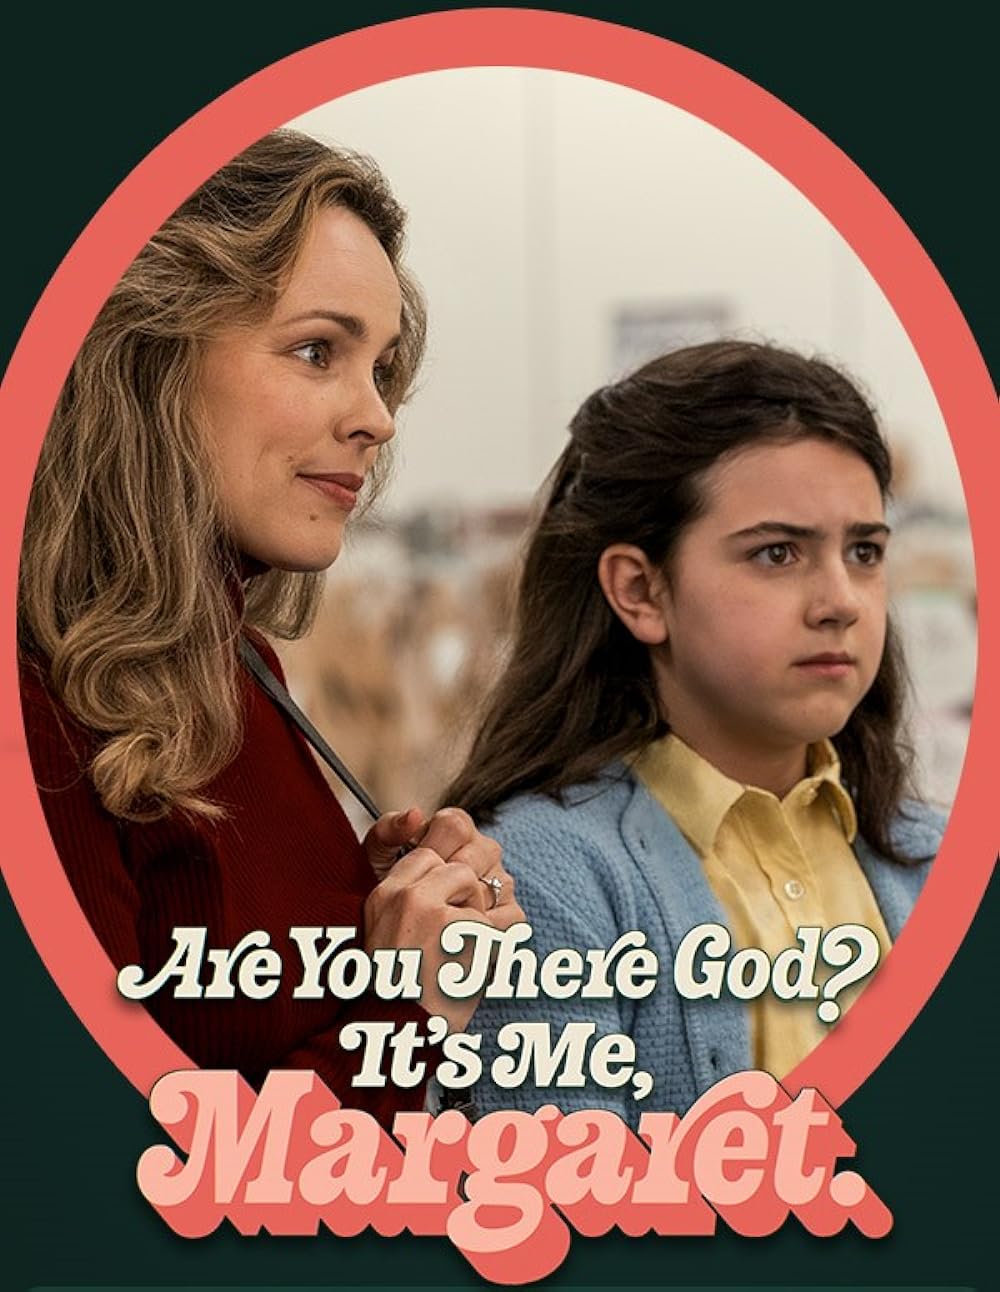 are you there god? it's me, margaret. movie poster